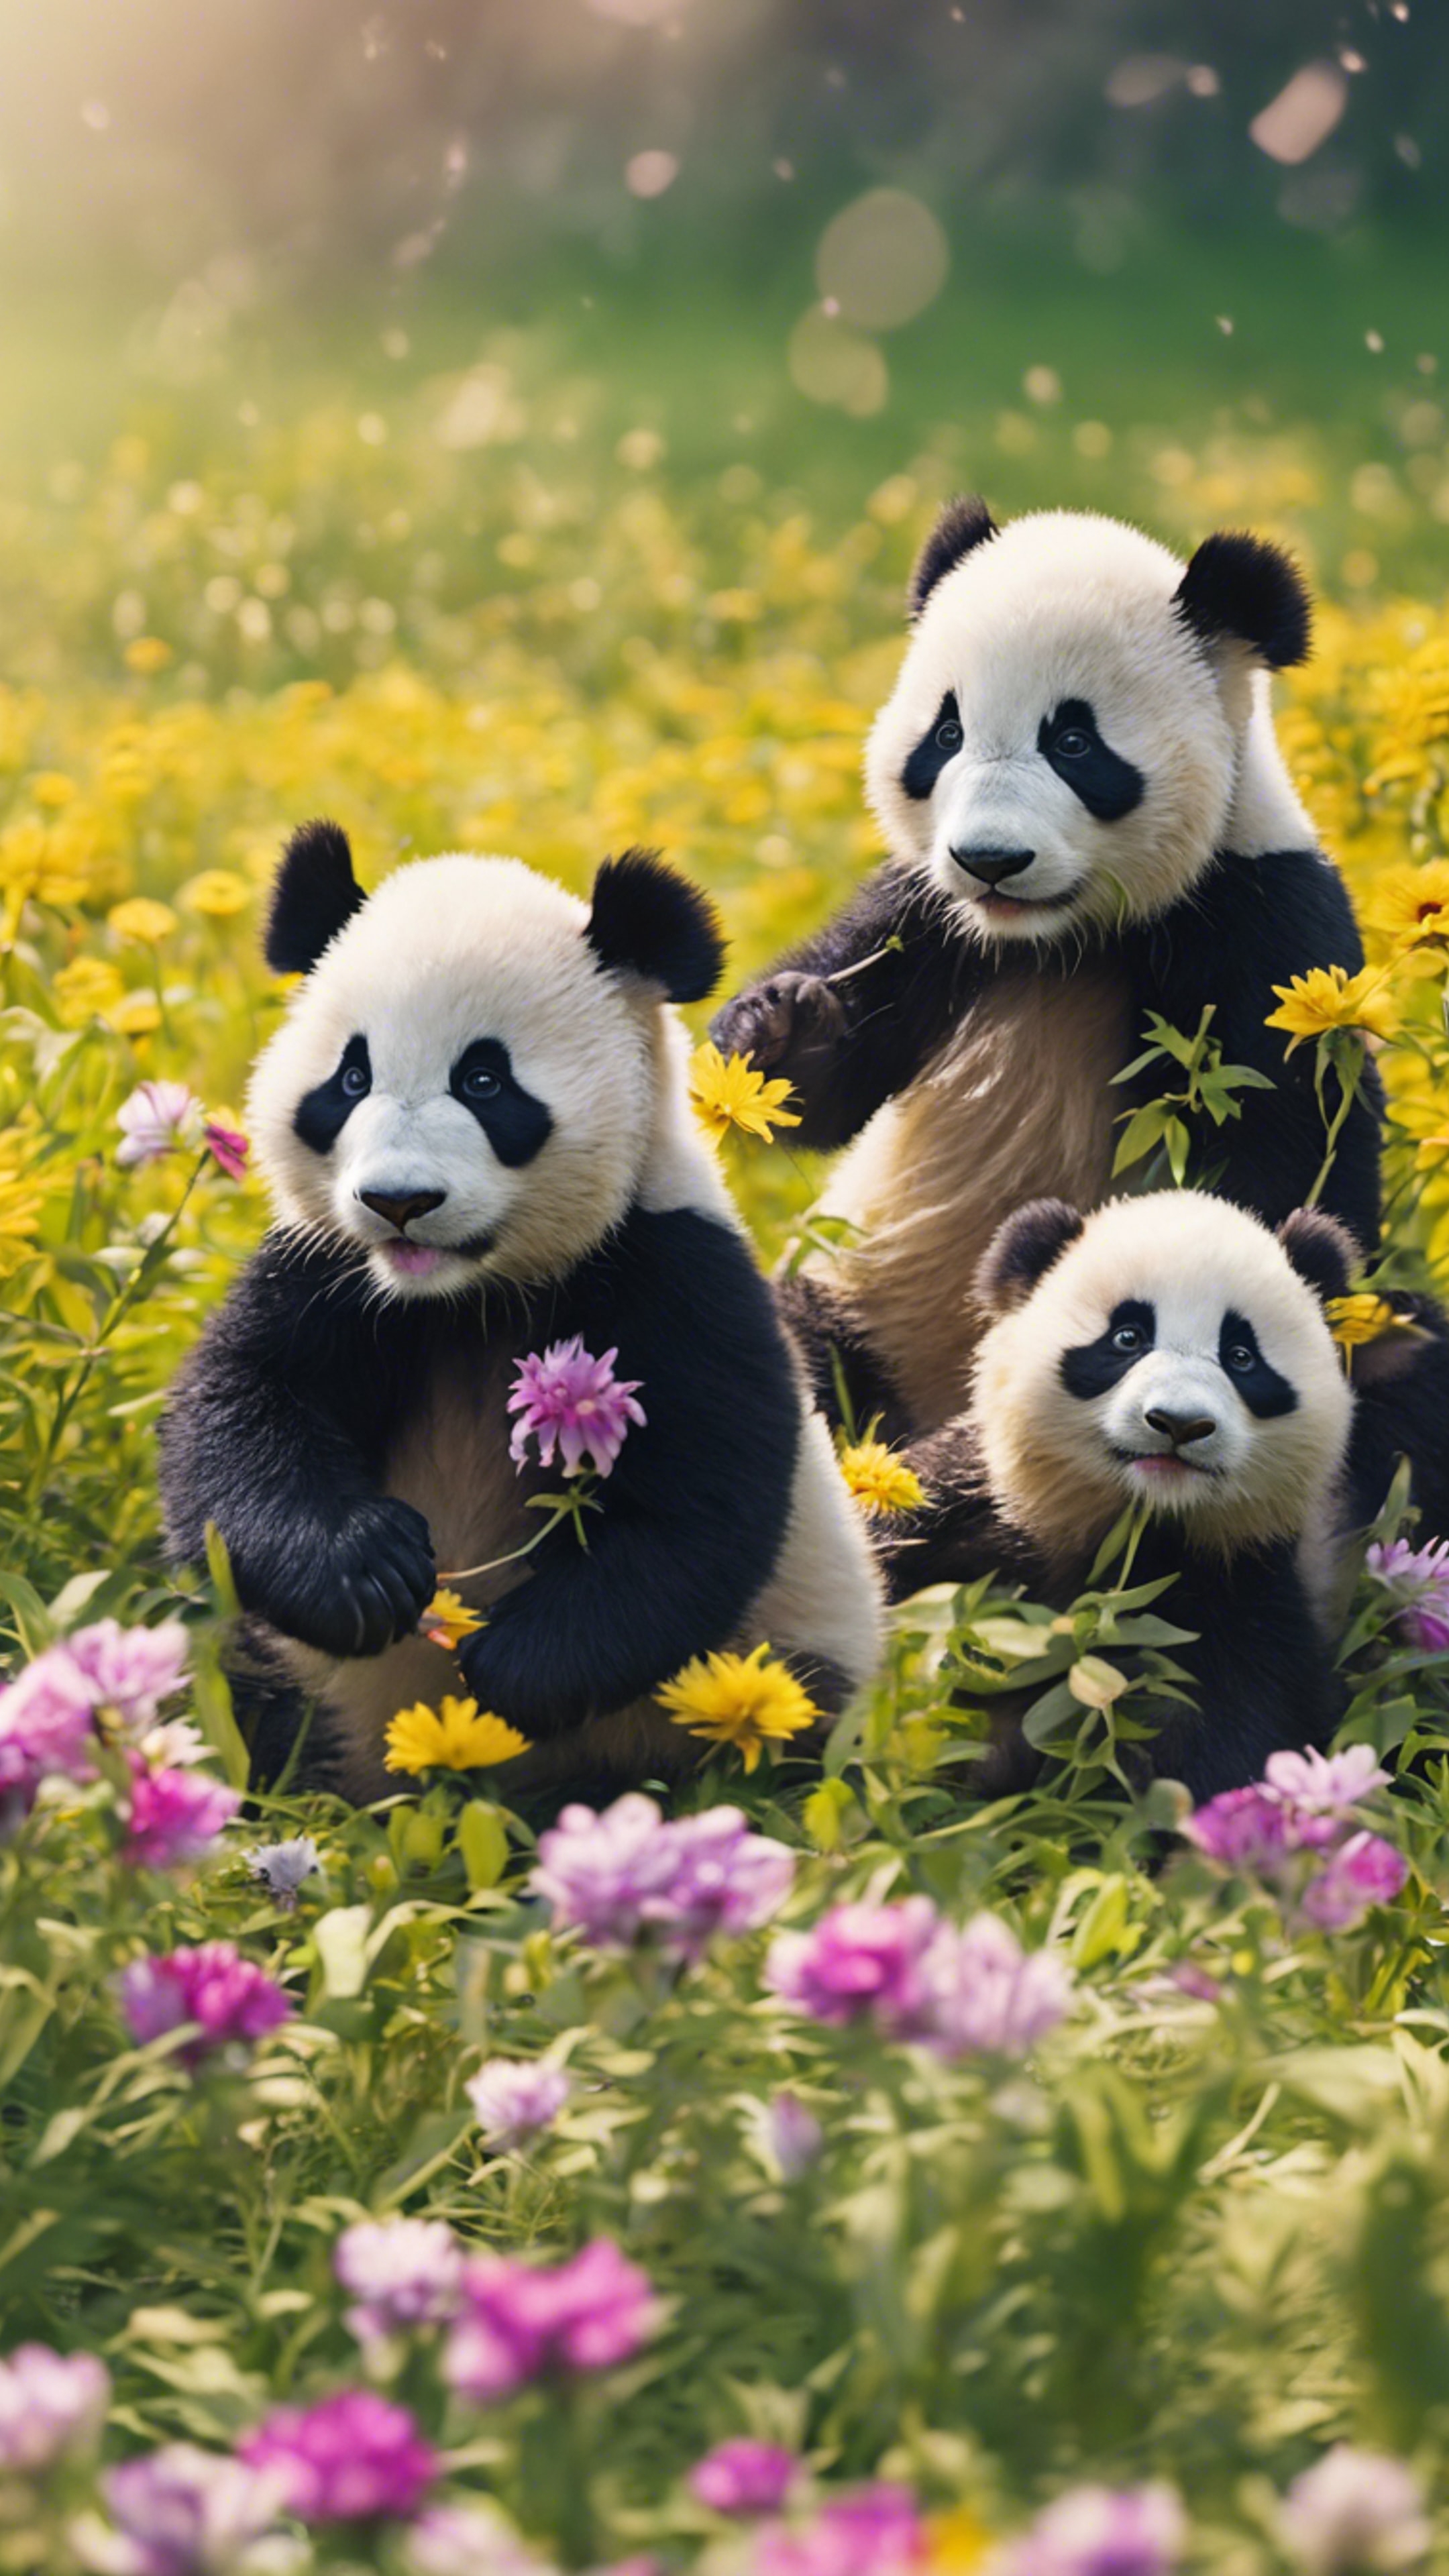 A group of lively panda cubs merrily playing tag in a field full of bright spring flowers. duvar kağıdı[9de4fa100eef4aefa43d]